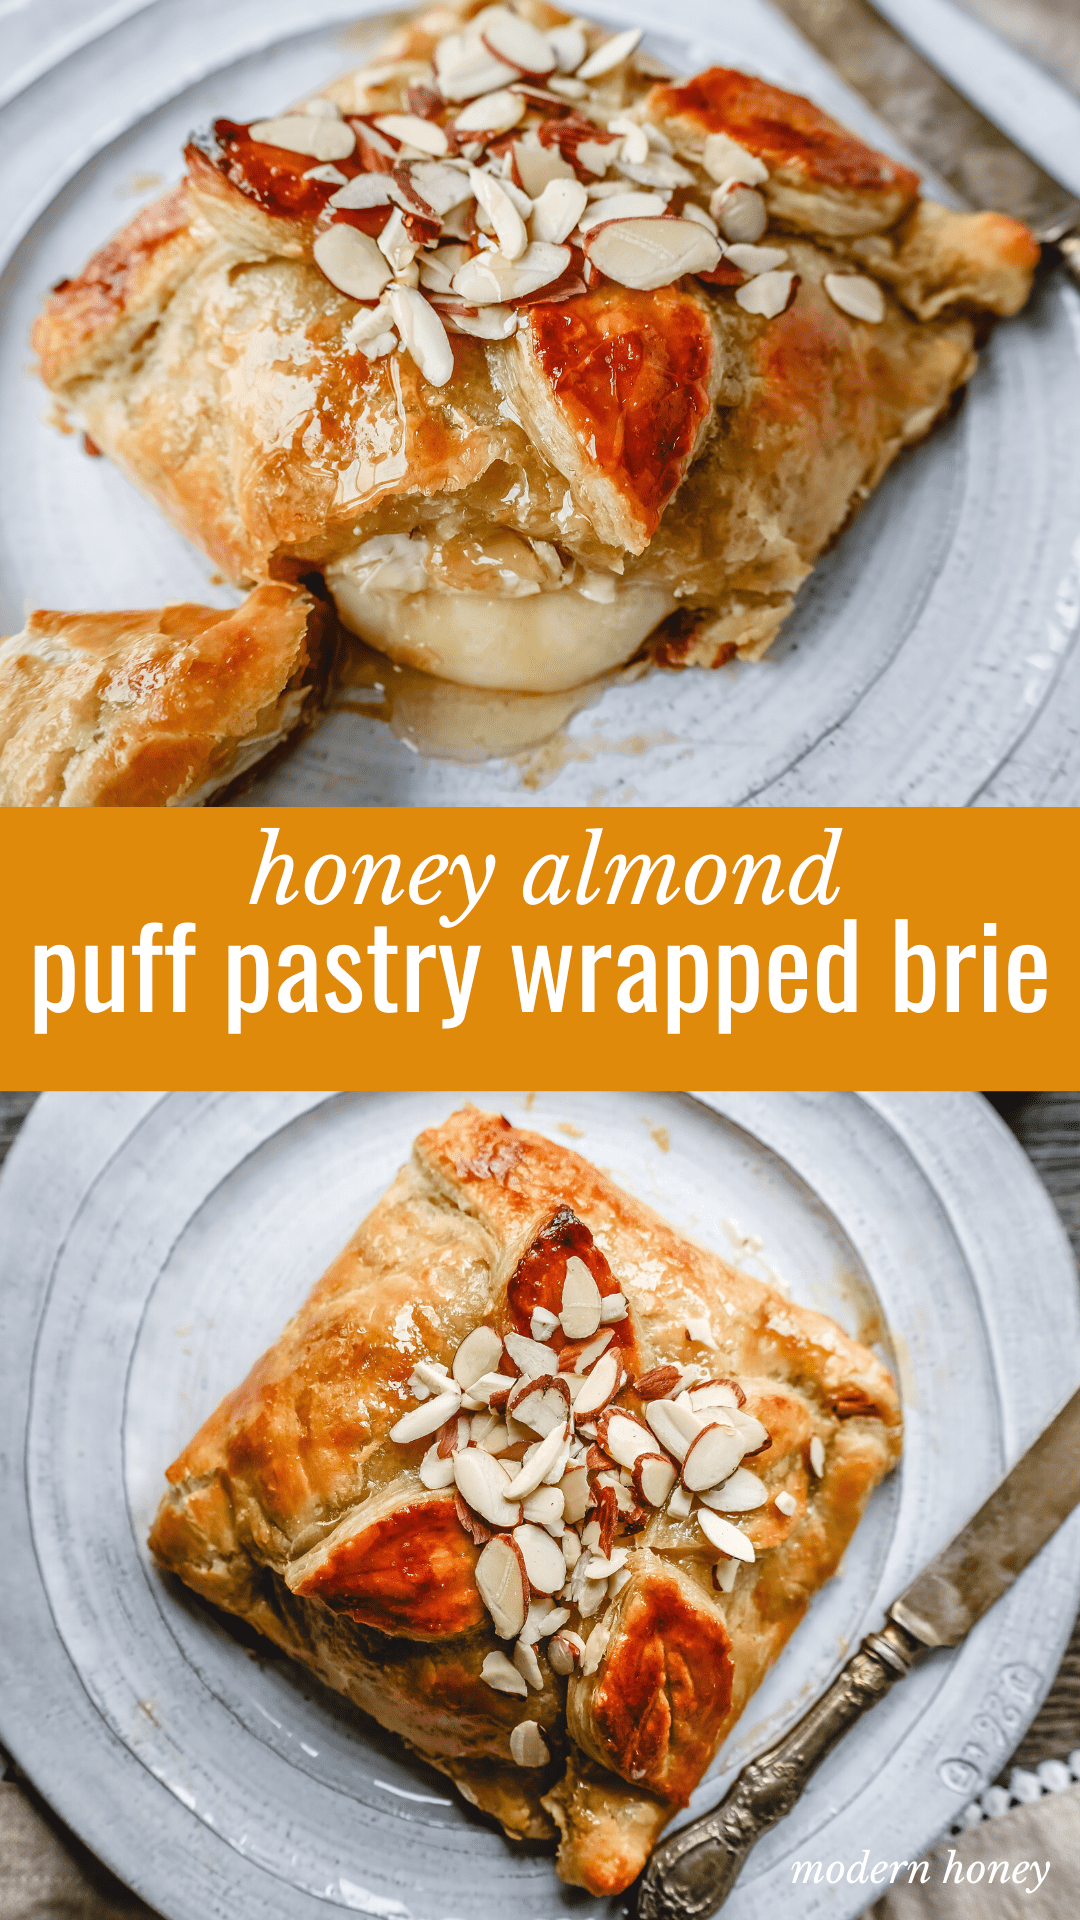 Honey Almond Puff Pastry Wrapped Brie Brie cheese wrapped in buttery puff pastry with local honey and sliced almonds. This is a sweet and salty festive party appetizer.